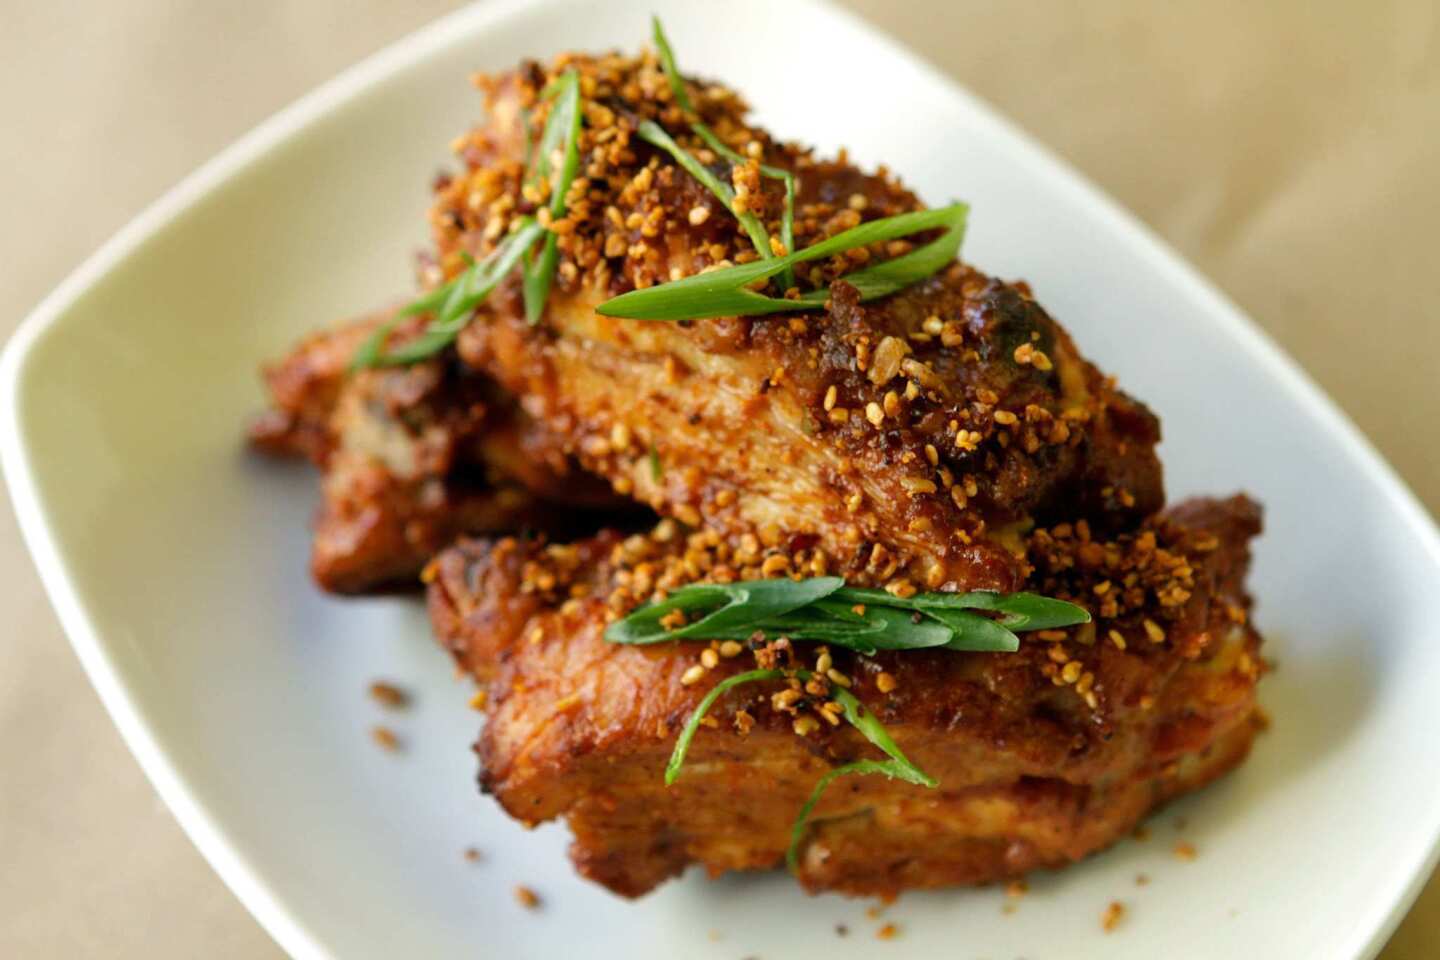 Szechuan- style chicken "ribs" with scallion, chile and sesame.